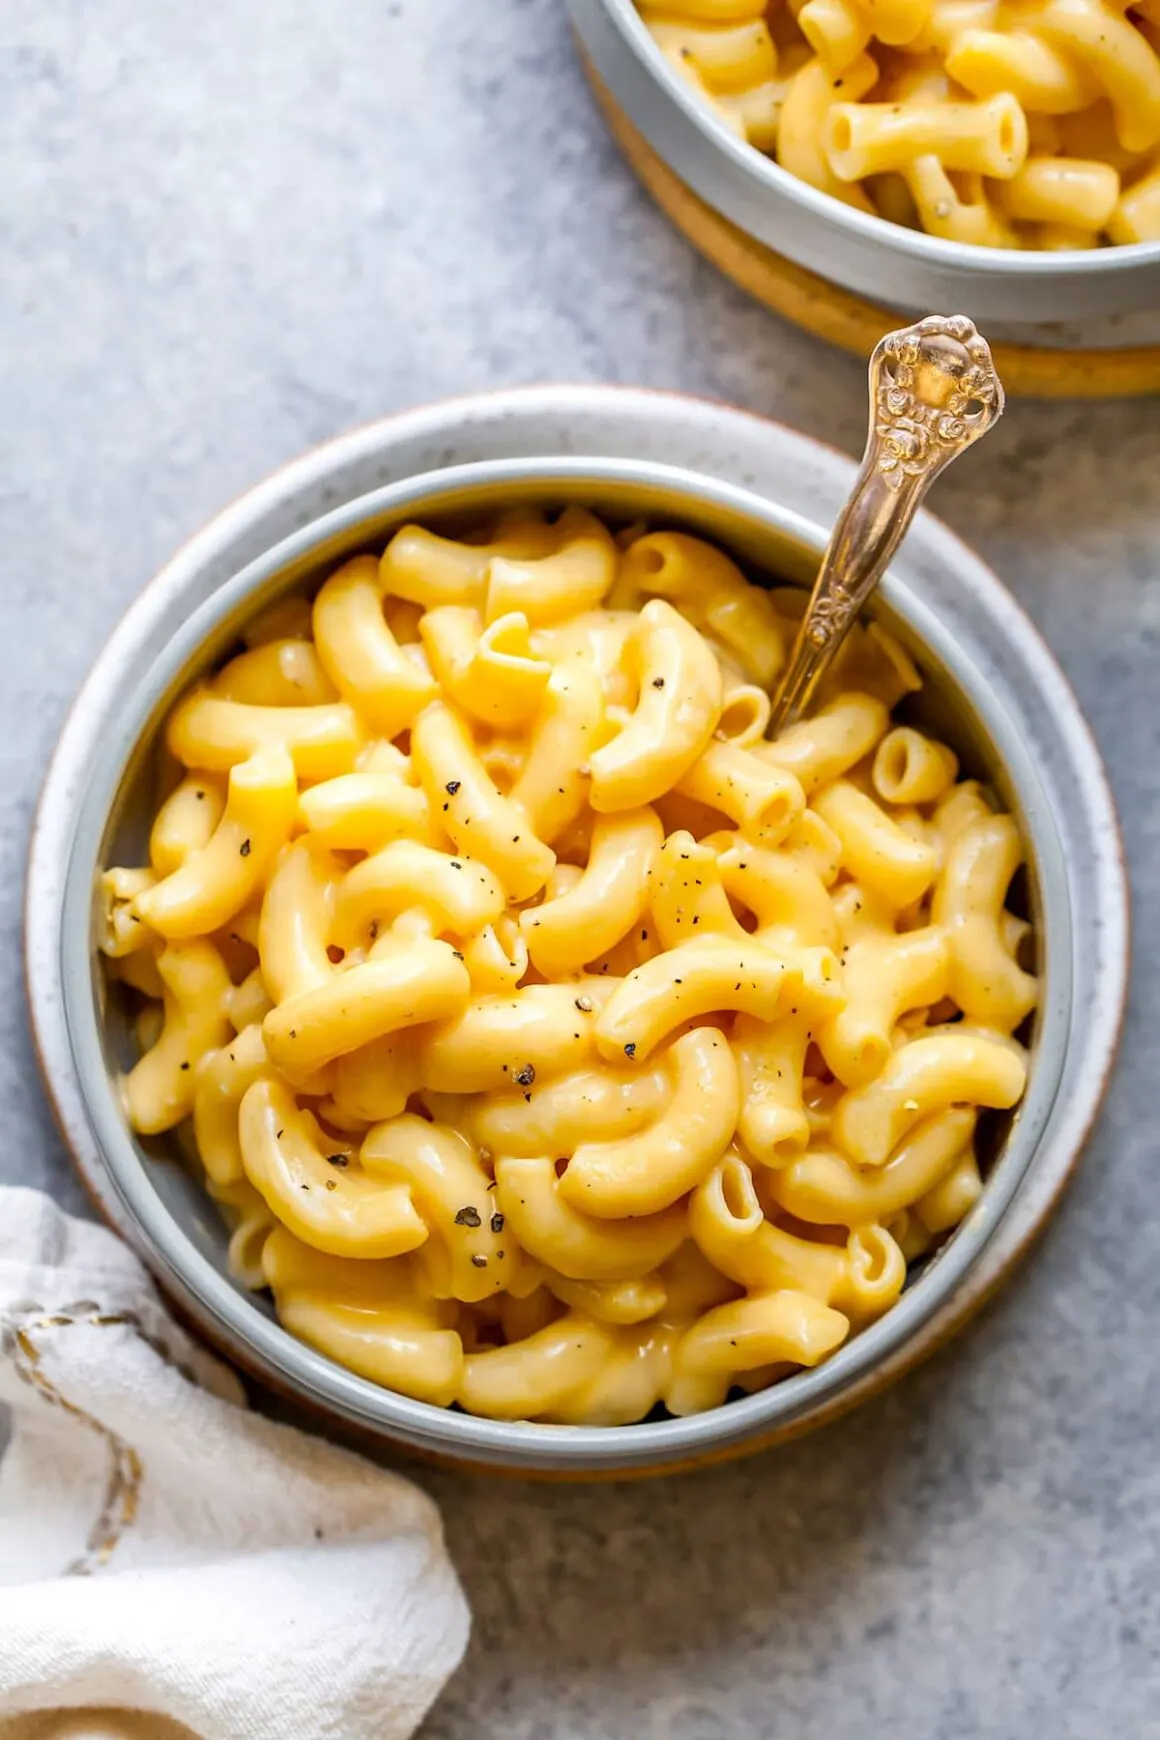 Easy Dinner Recipes: Stovetop Mac and Cheese